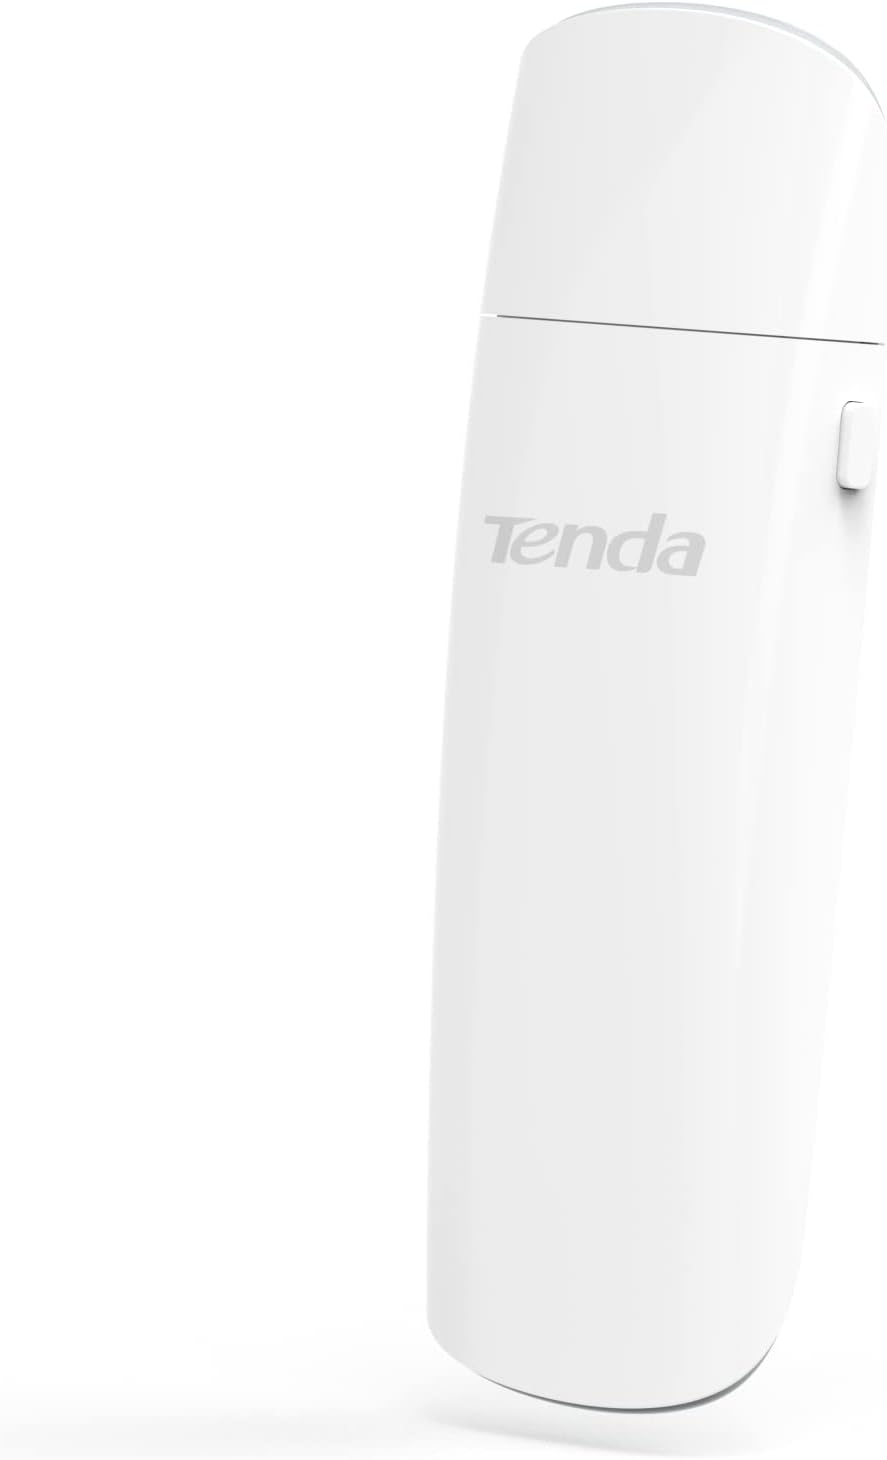 Tenda WiFi Adapter(U12), AC1300 USB WiFi Adapter for Desktop PC Laptop, Dual Band Wireless Wi-Fi USB 3.0 Adapter with Built-in High Gain Antenna for PC, Works with Windows and Mac OS, White